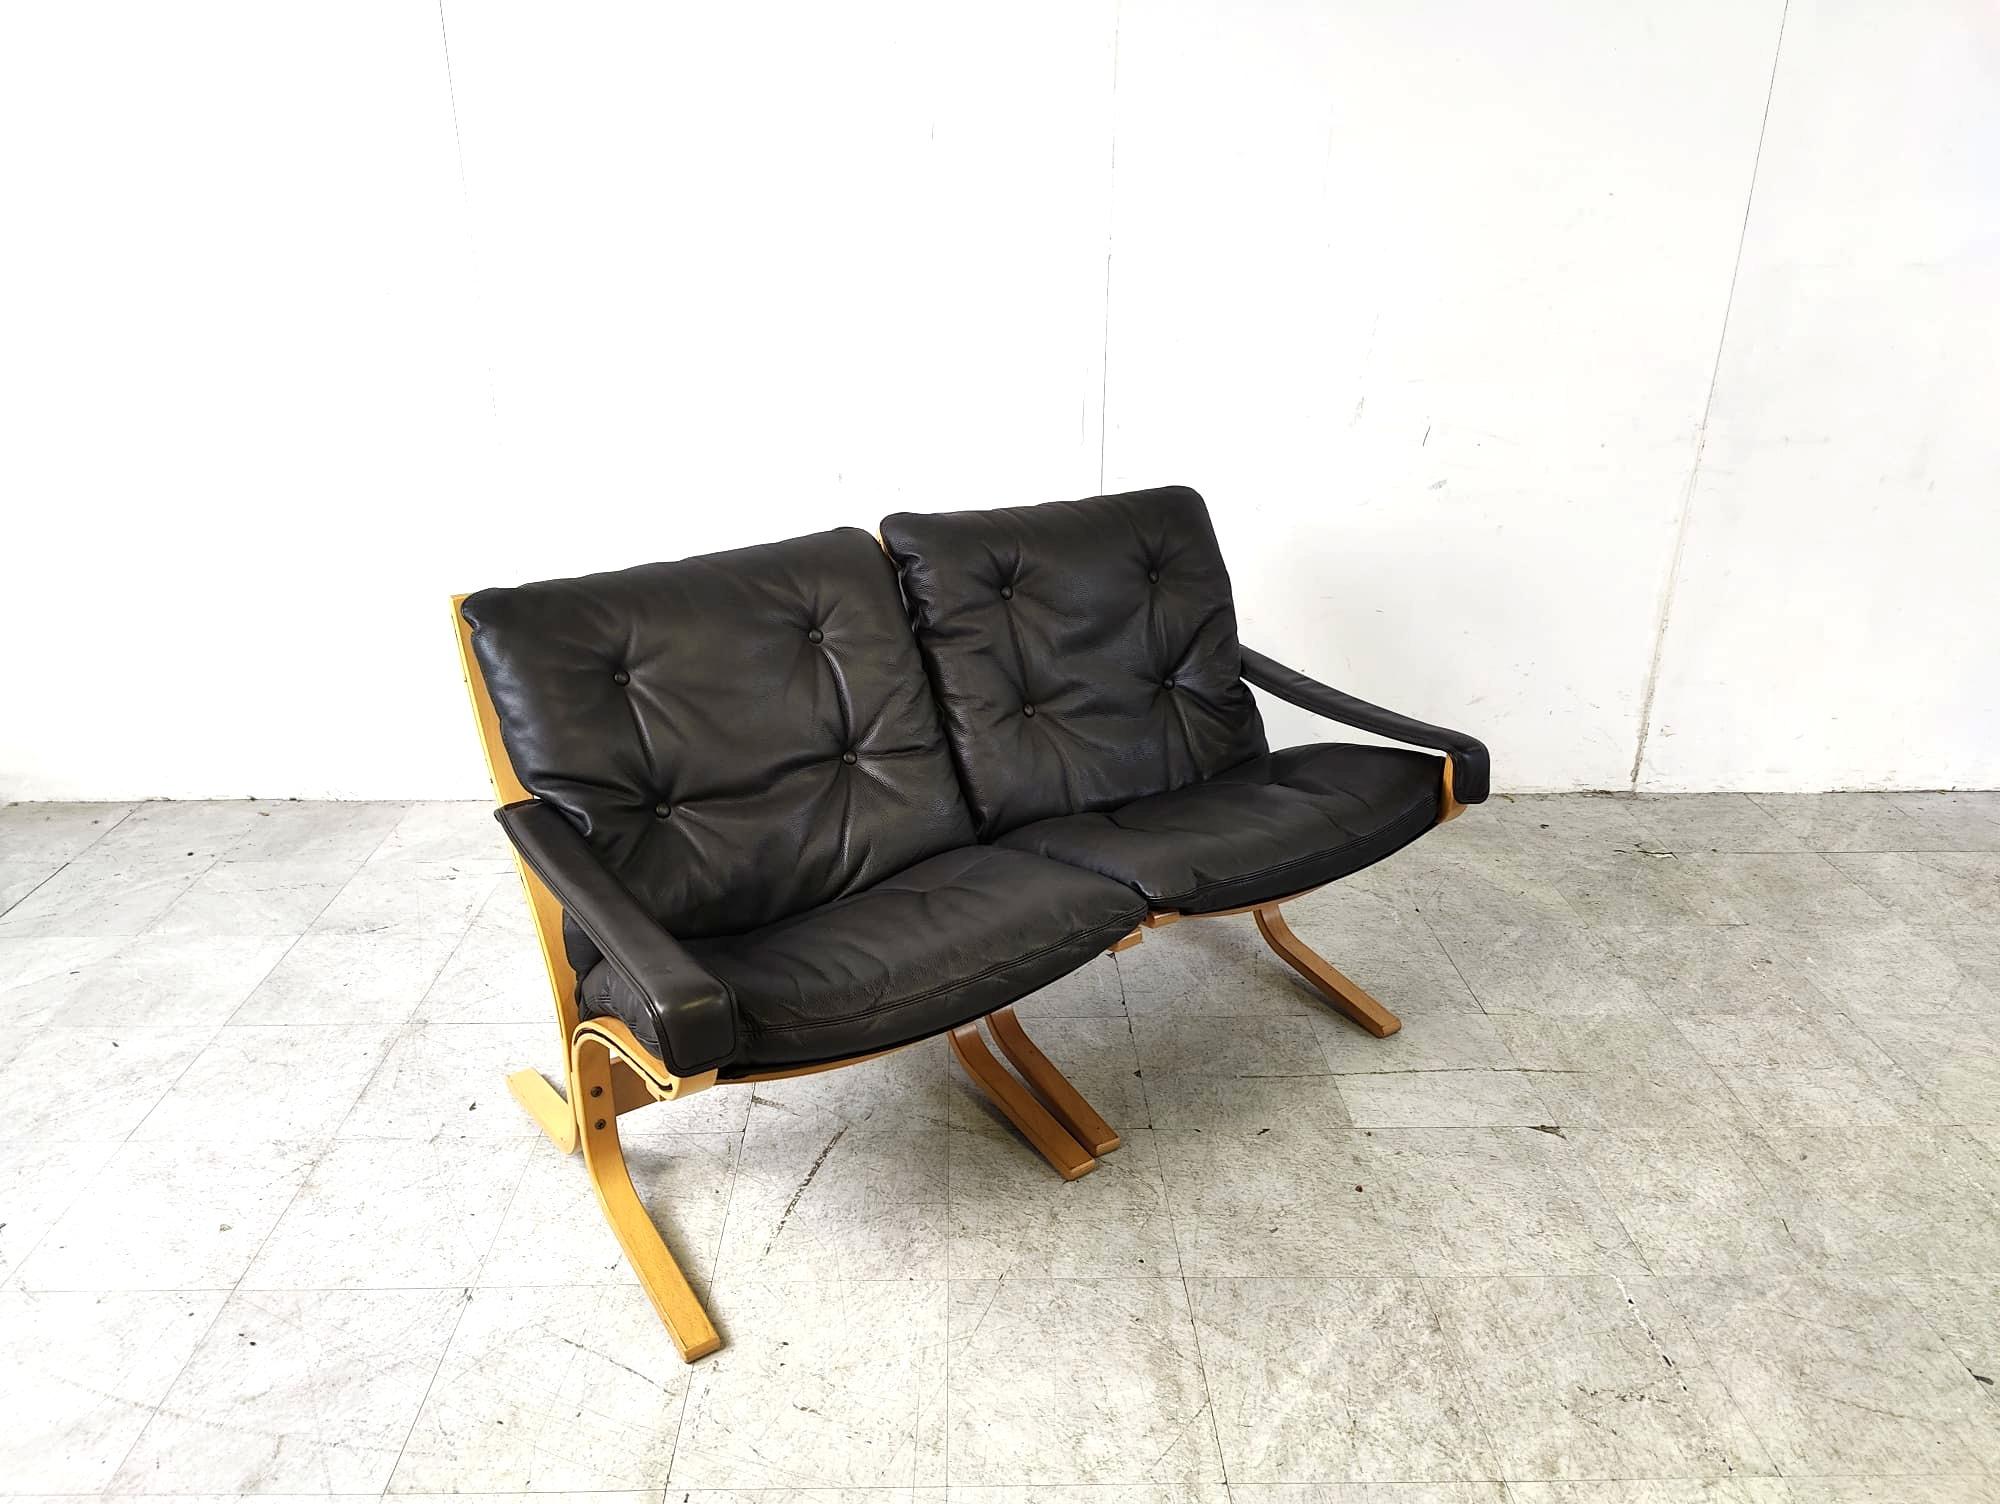 Rare two seater bench designed by Ingmar Relling for Westnofa.

It consists of two armchairs put toghether to create this rare bench. 

Black leather with a beige beech wood frame.

Very good condition

Will be disassembled for shipping.

1980s -